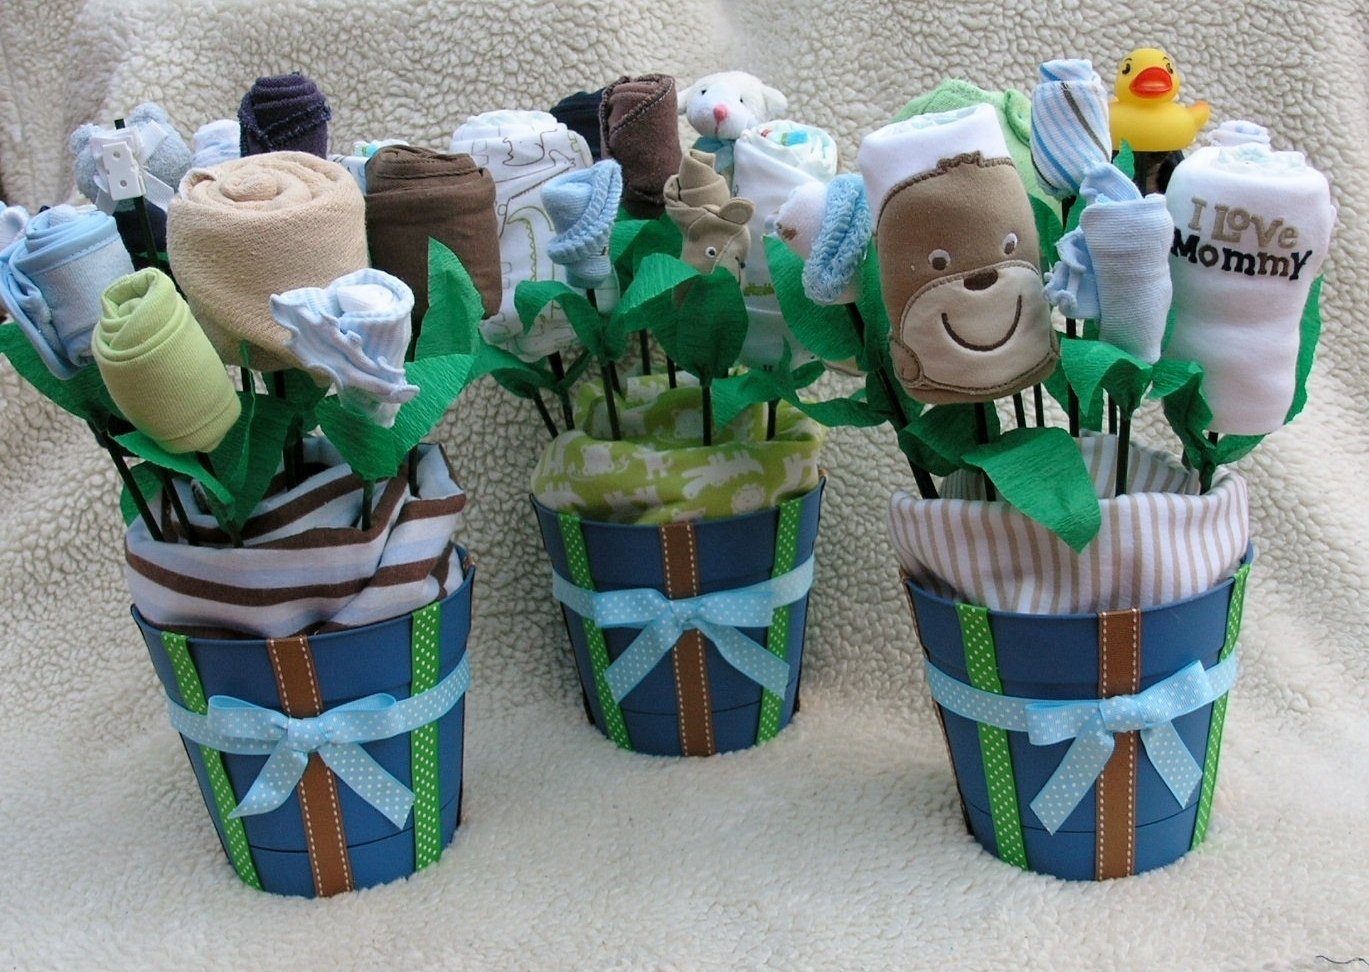 10 Unique Baby Shower Centerpiece Ideas Homemade baby shower ideas for boy magnificent uk diy pinterest theme and a 2023